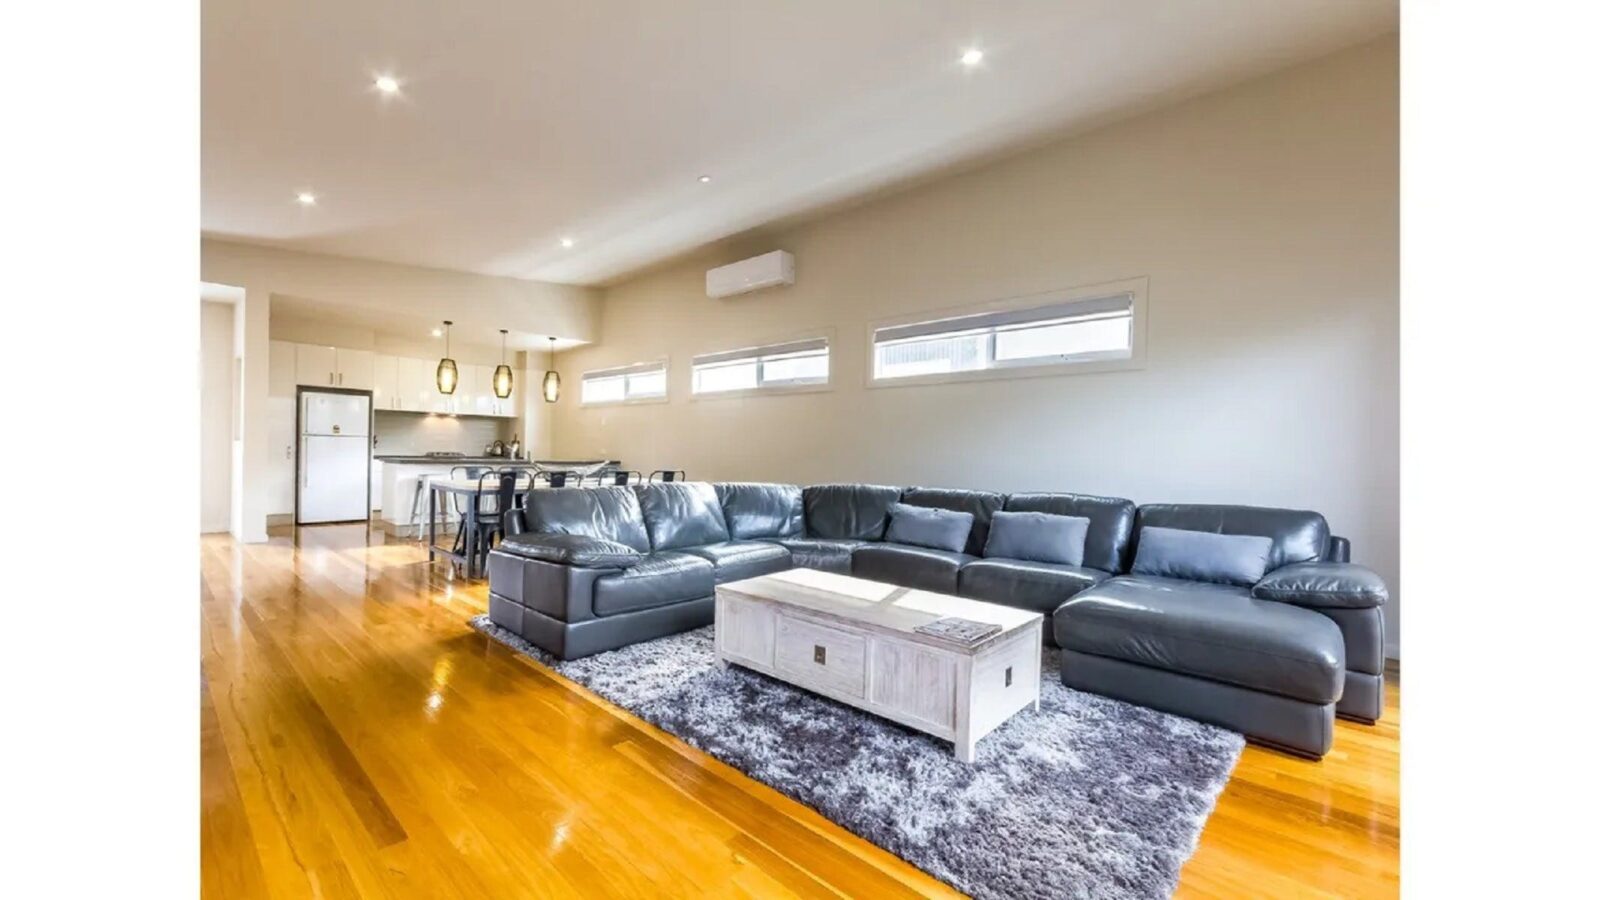 Light filled living room showing large leather corner couch and kitchen in background. Timber floor